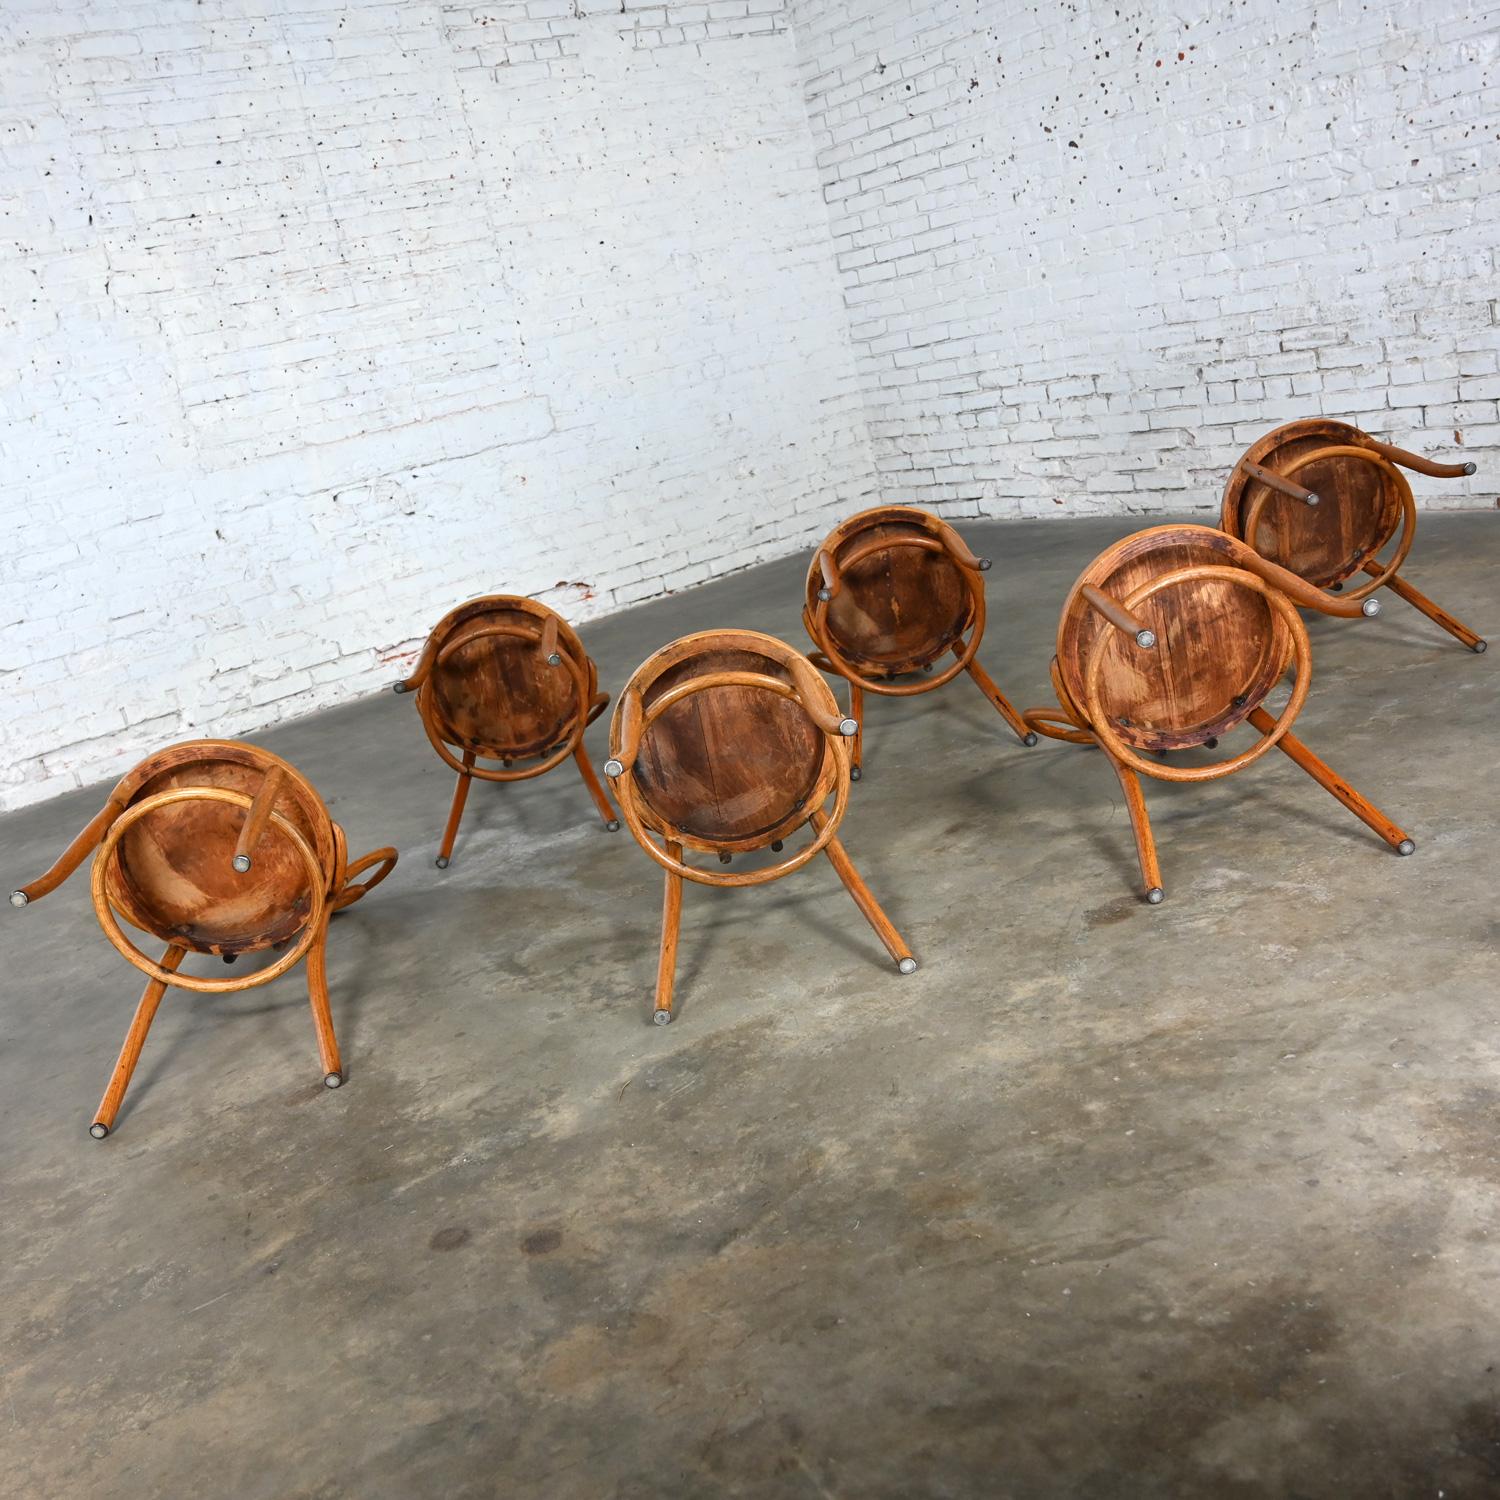 Bauhaus Oak Bentwood Chairs Attributed to Thonet #18 Café Chair Set of 6 For Sale 11